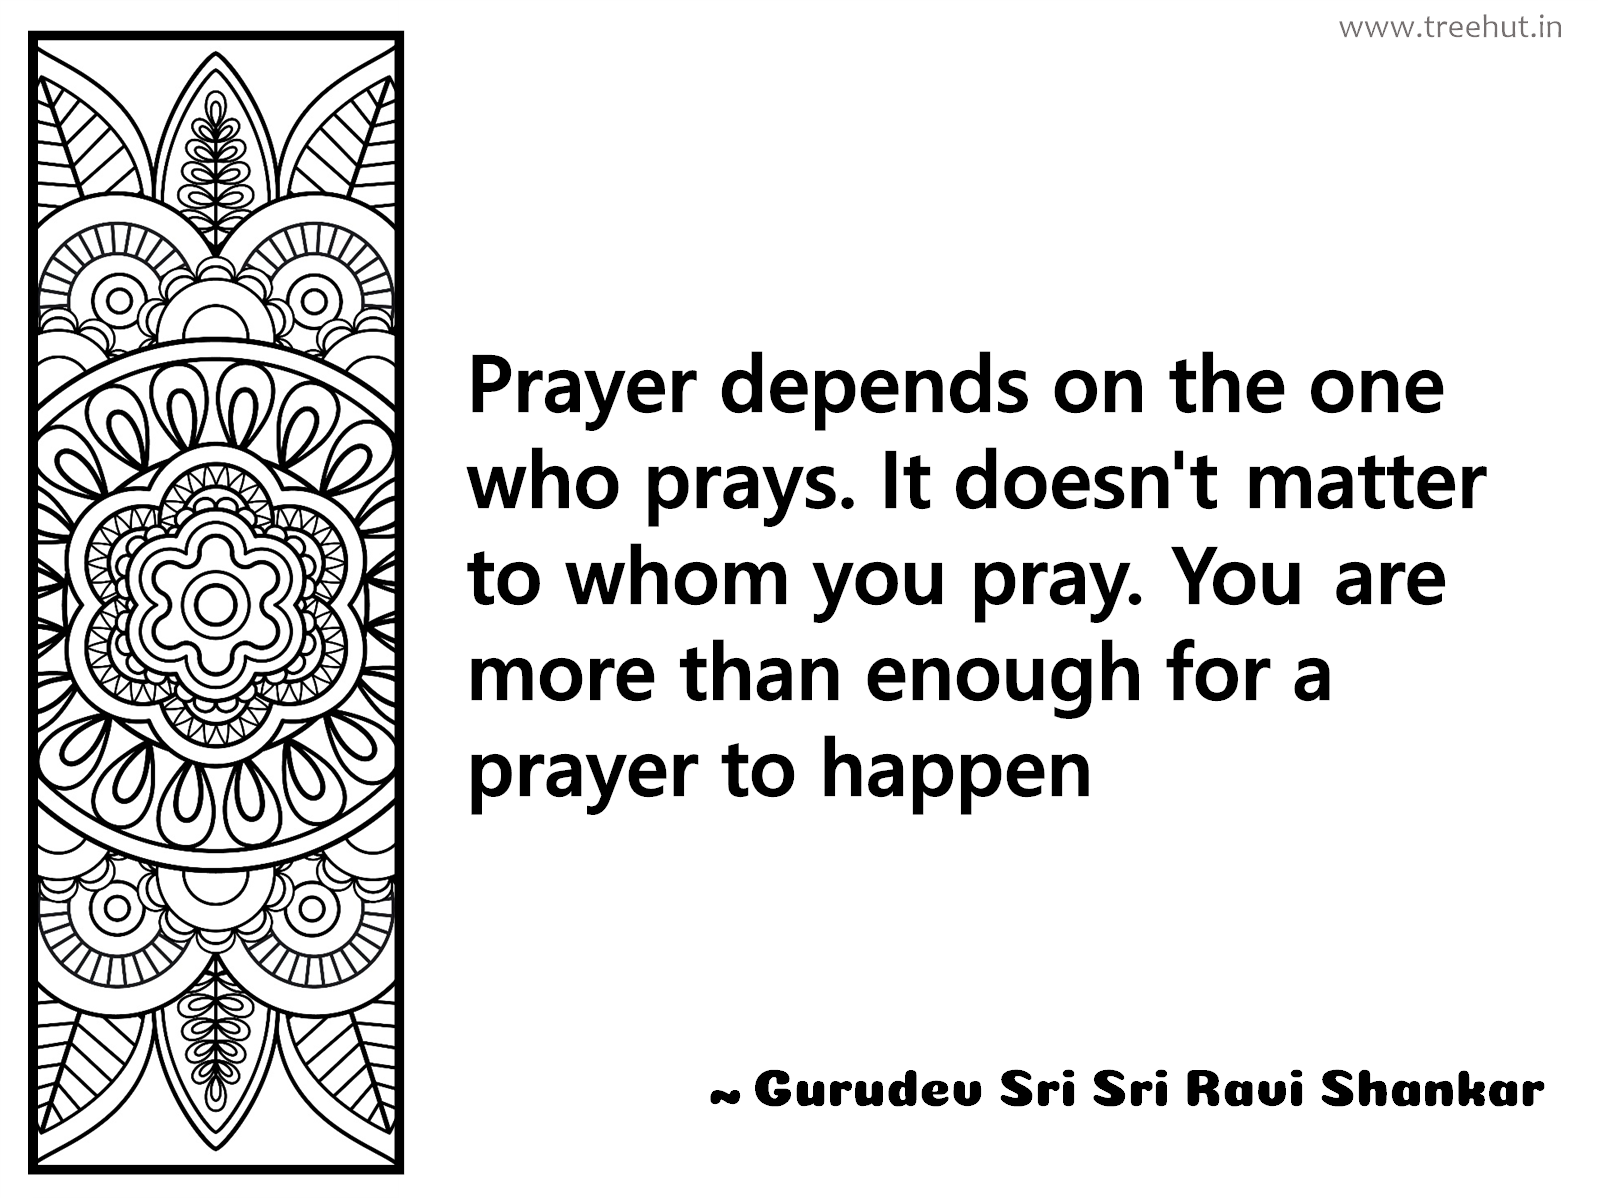 Prayer depends on the one who prays. It doesn't matter to whom you pray. You are more than enough for a prayer to happen Inspirational Quote by Gurudev Sri Sri Ravi Shankar, coloring pages